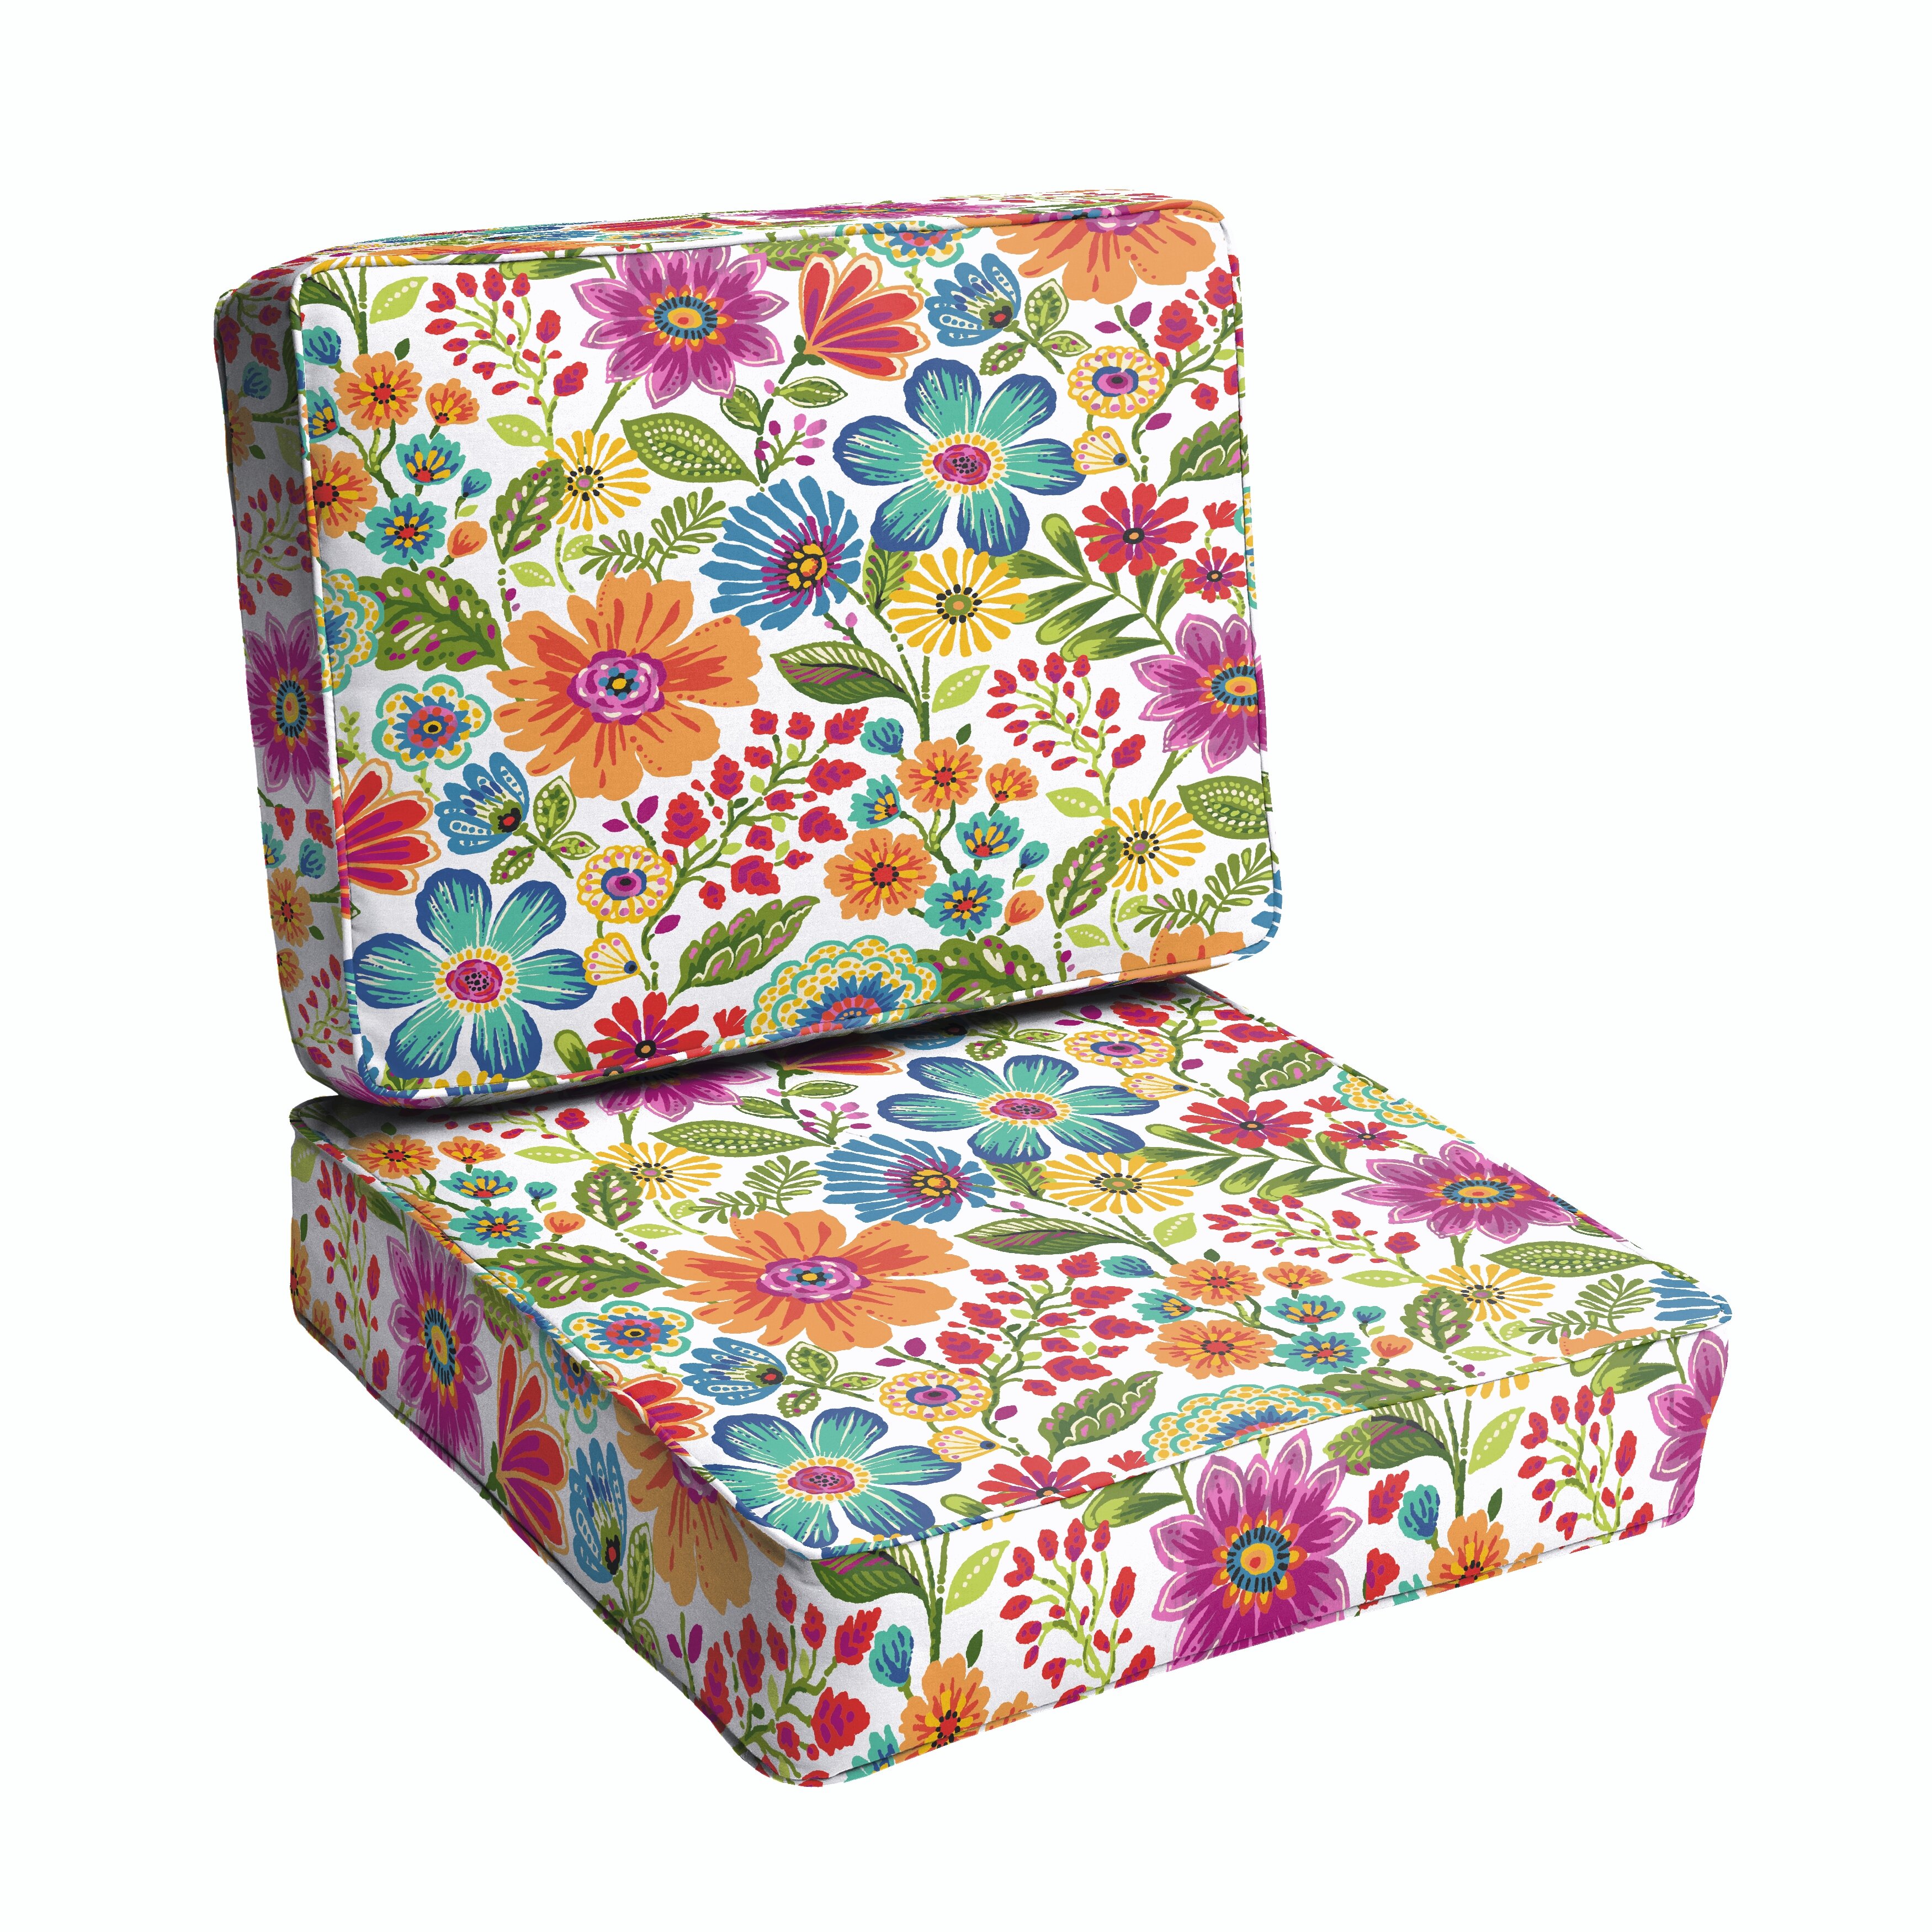 Red Barrel Studio Budron Floral Piped Indoor Outdoor Dining Chair Cushion 